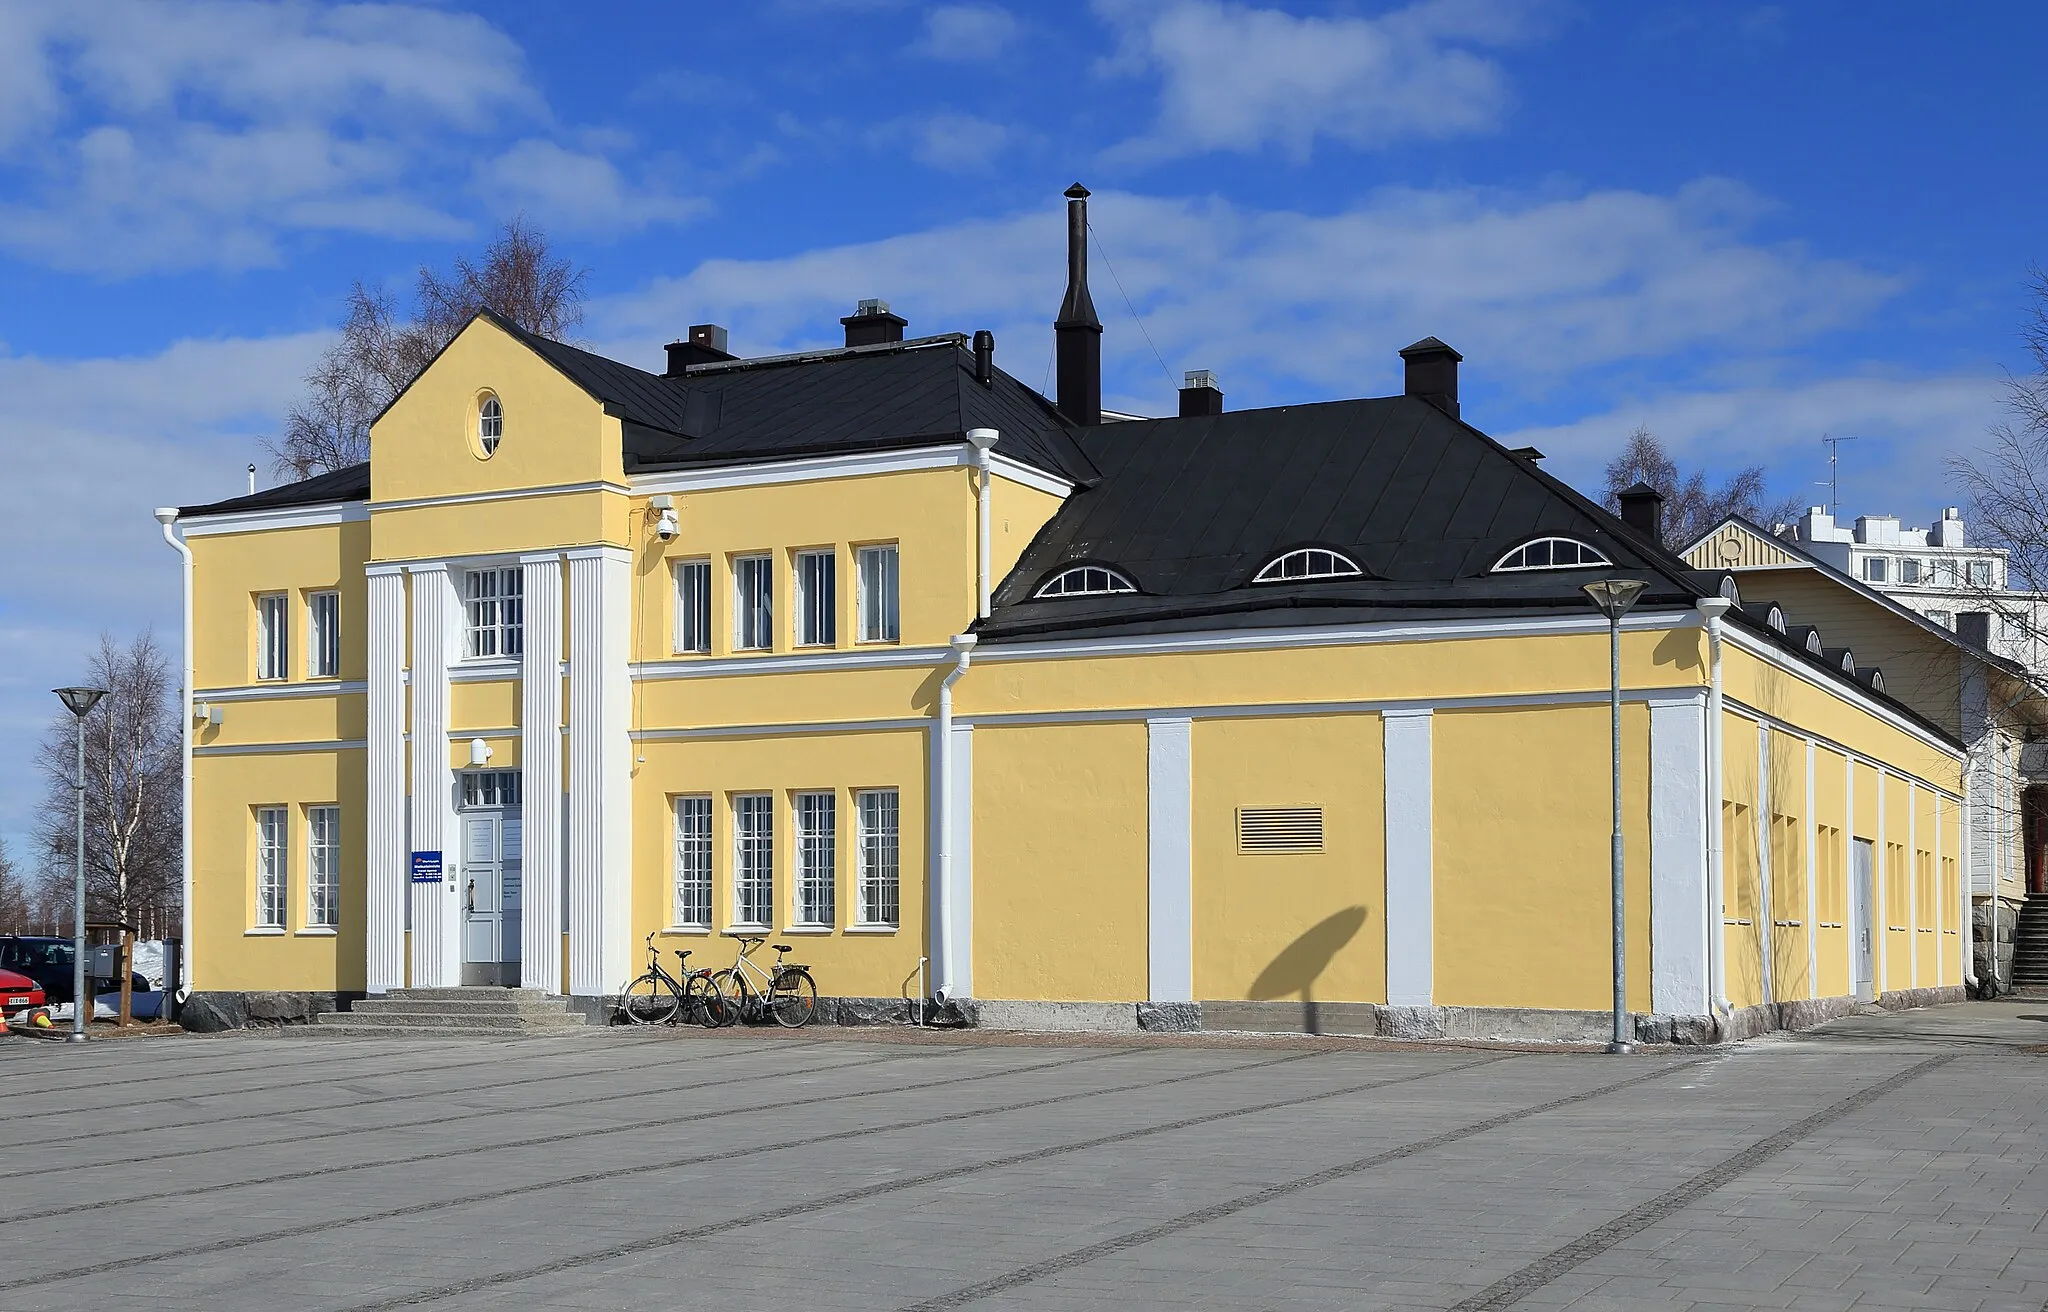 Photo showing: The Gemstone Gallery in Kemi, Finland. The building is an old customs house.